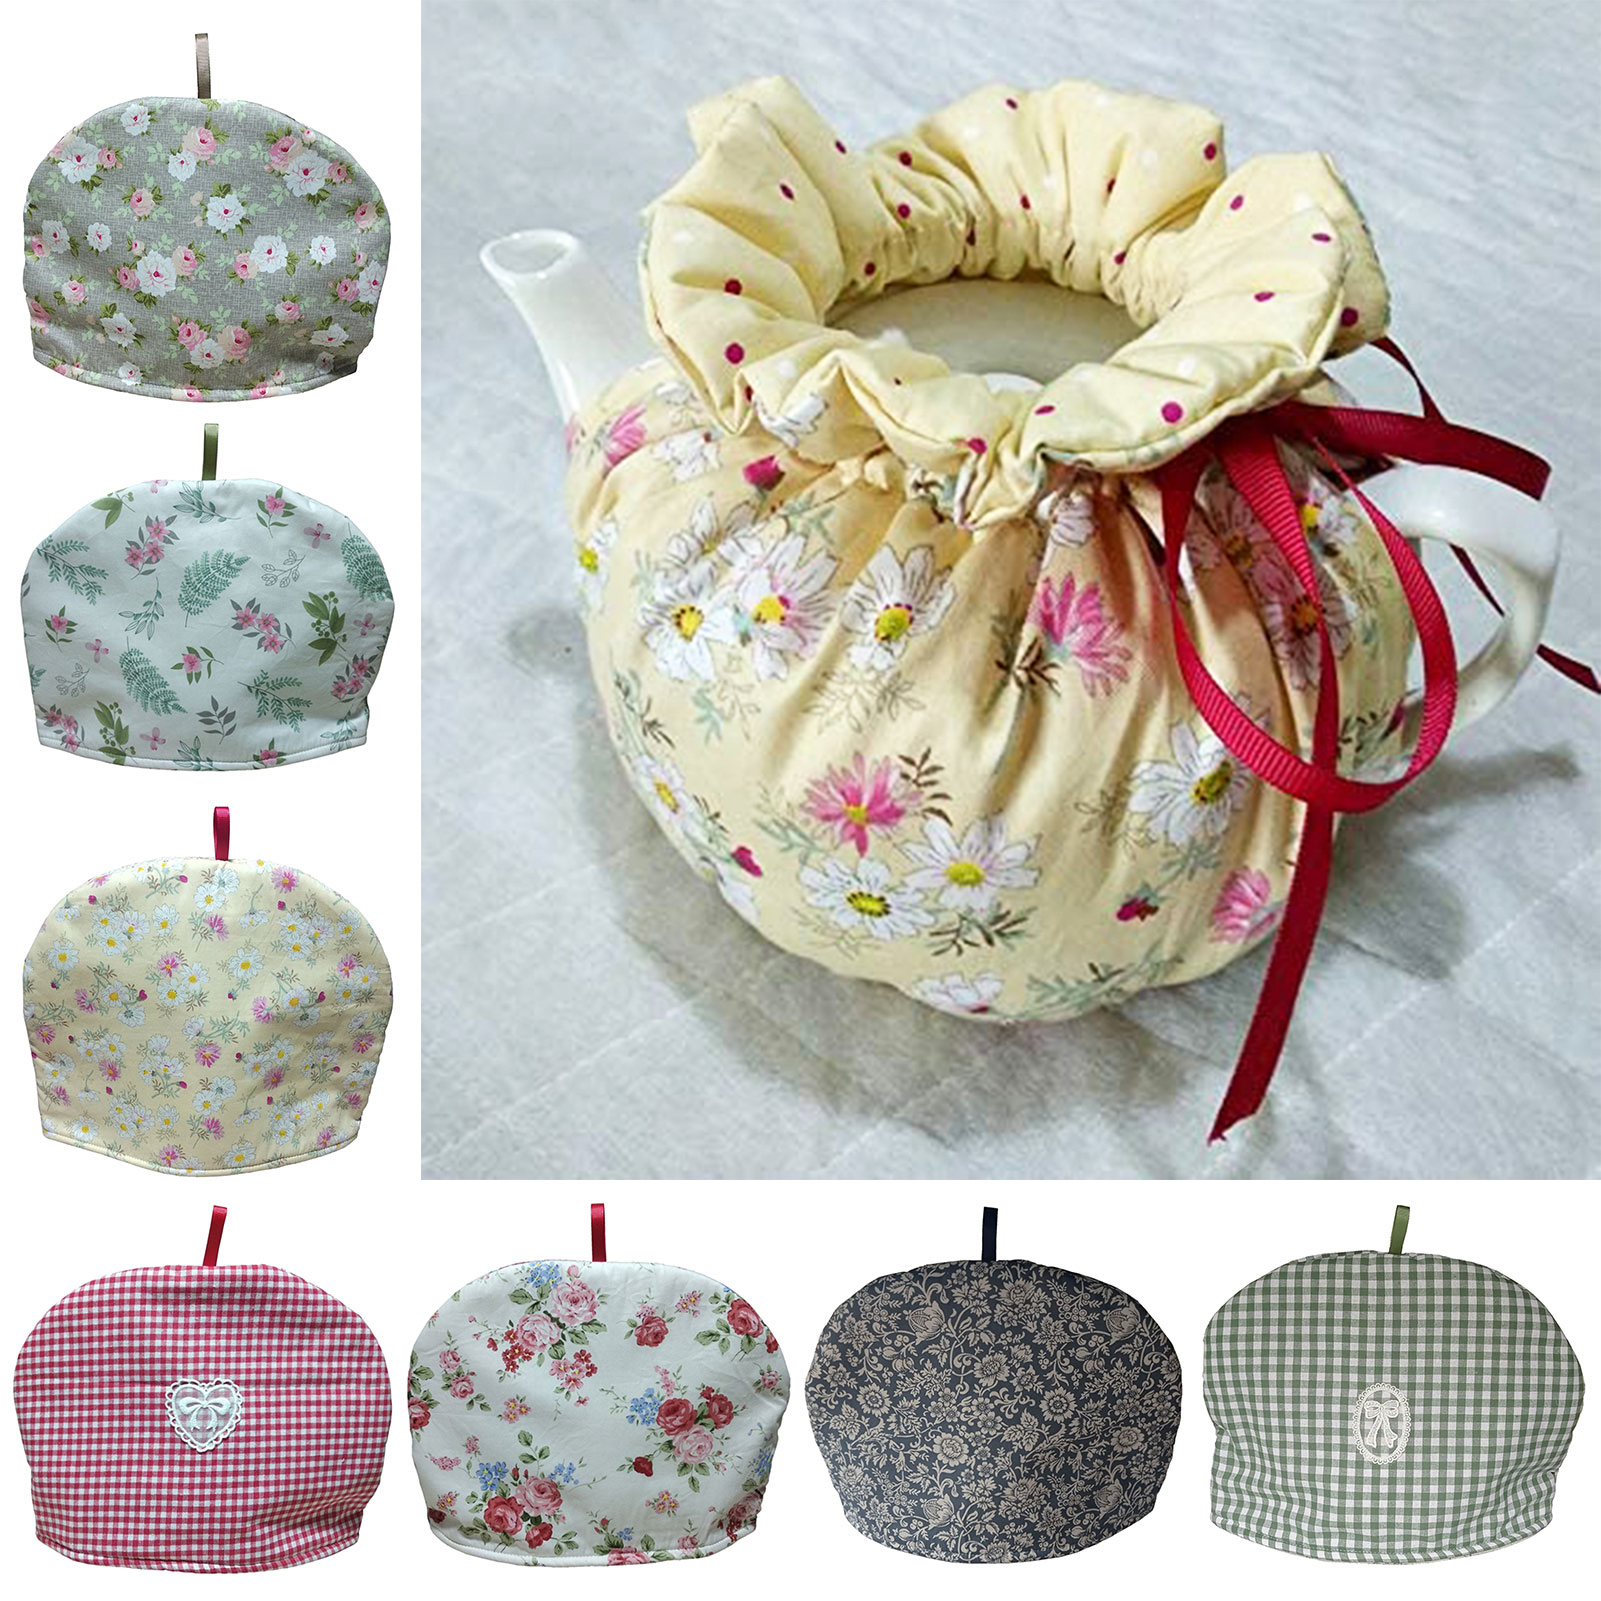 UDIYO 2PCS Tea Cosy, Cotton Vintage Printed Tea Cozy for Tea Pot Dust Cover Insulated Kettle Cover Breakfast Warmer for Home Kitchen Decor - image 1 of 7